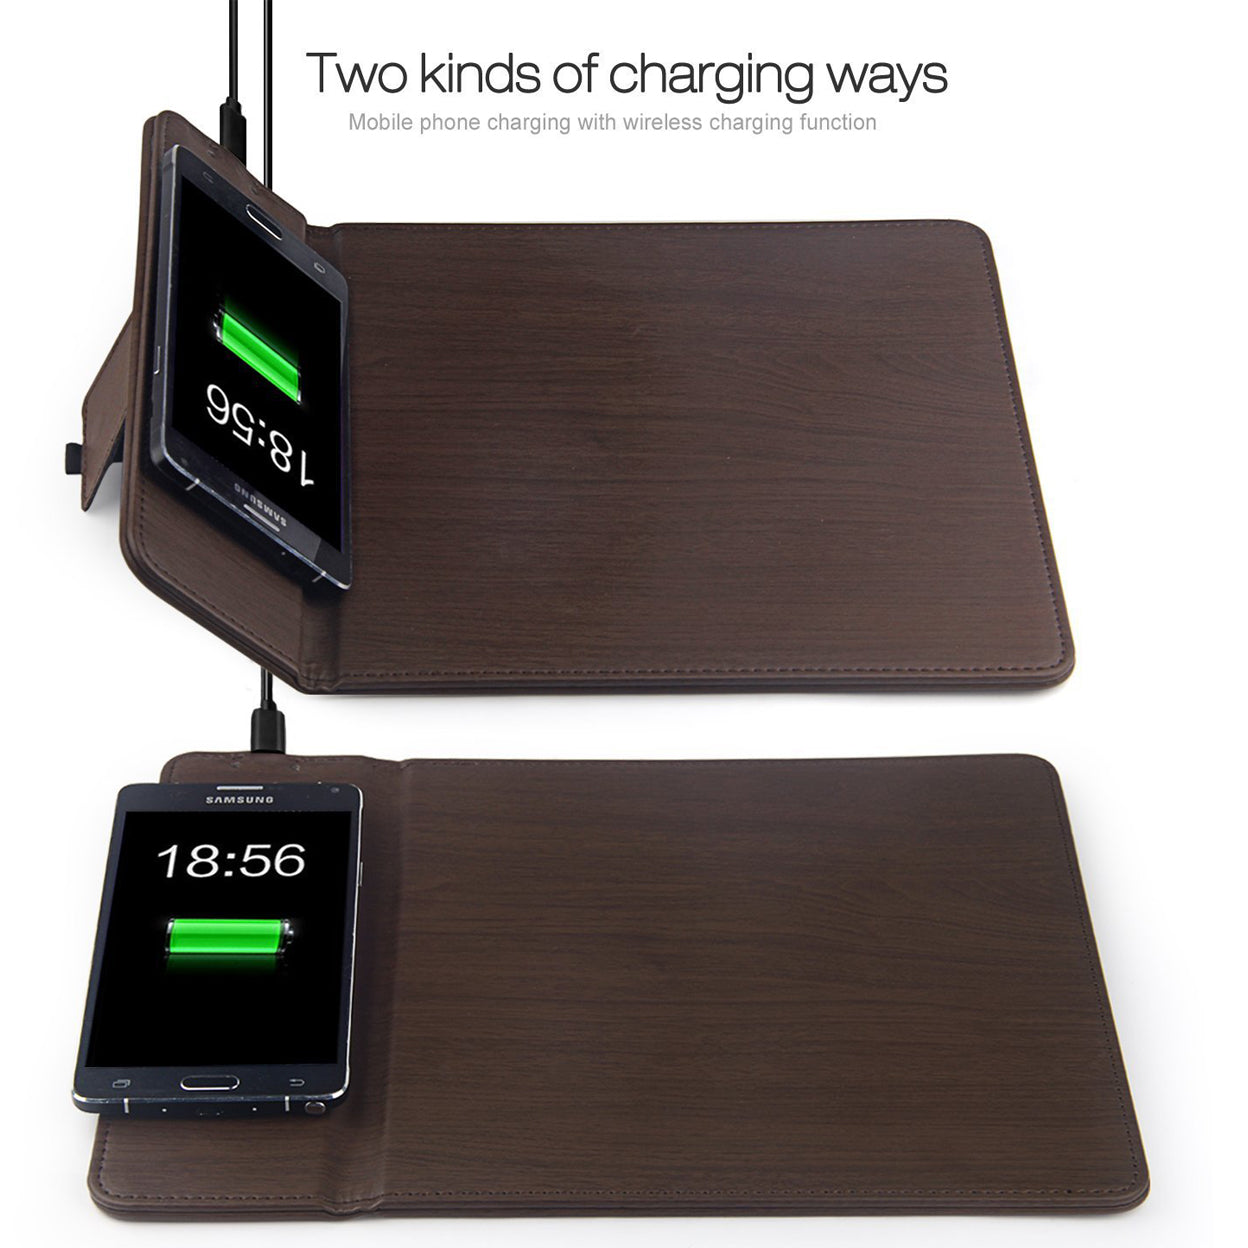 Power Pad Wireless Charger And Mouse Pad For iPhone 8 And Samsung by VistaShops